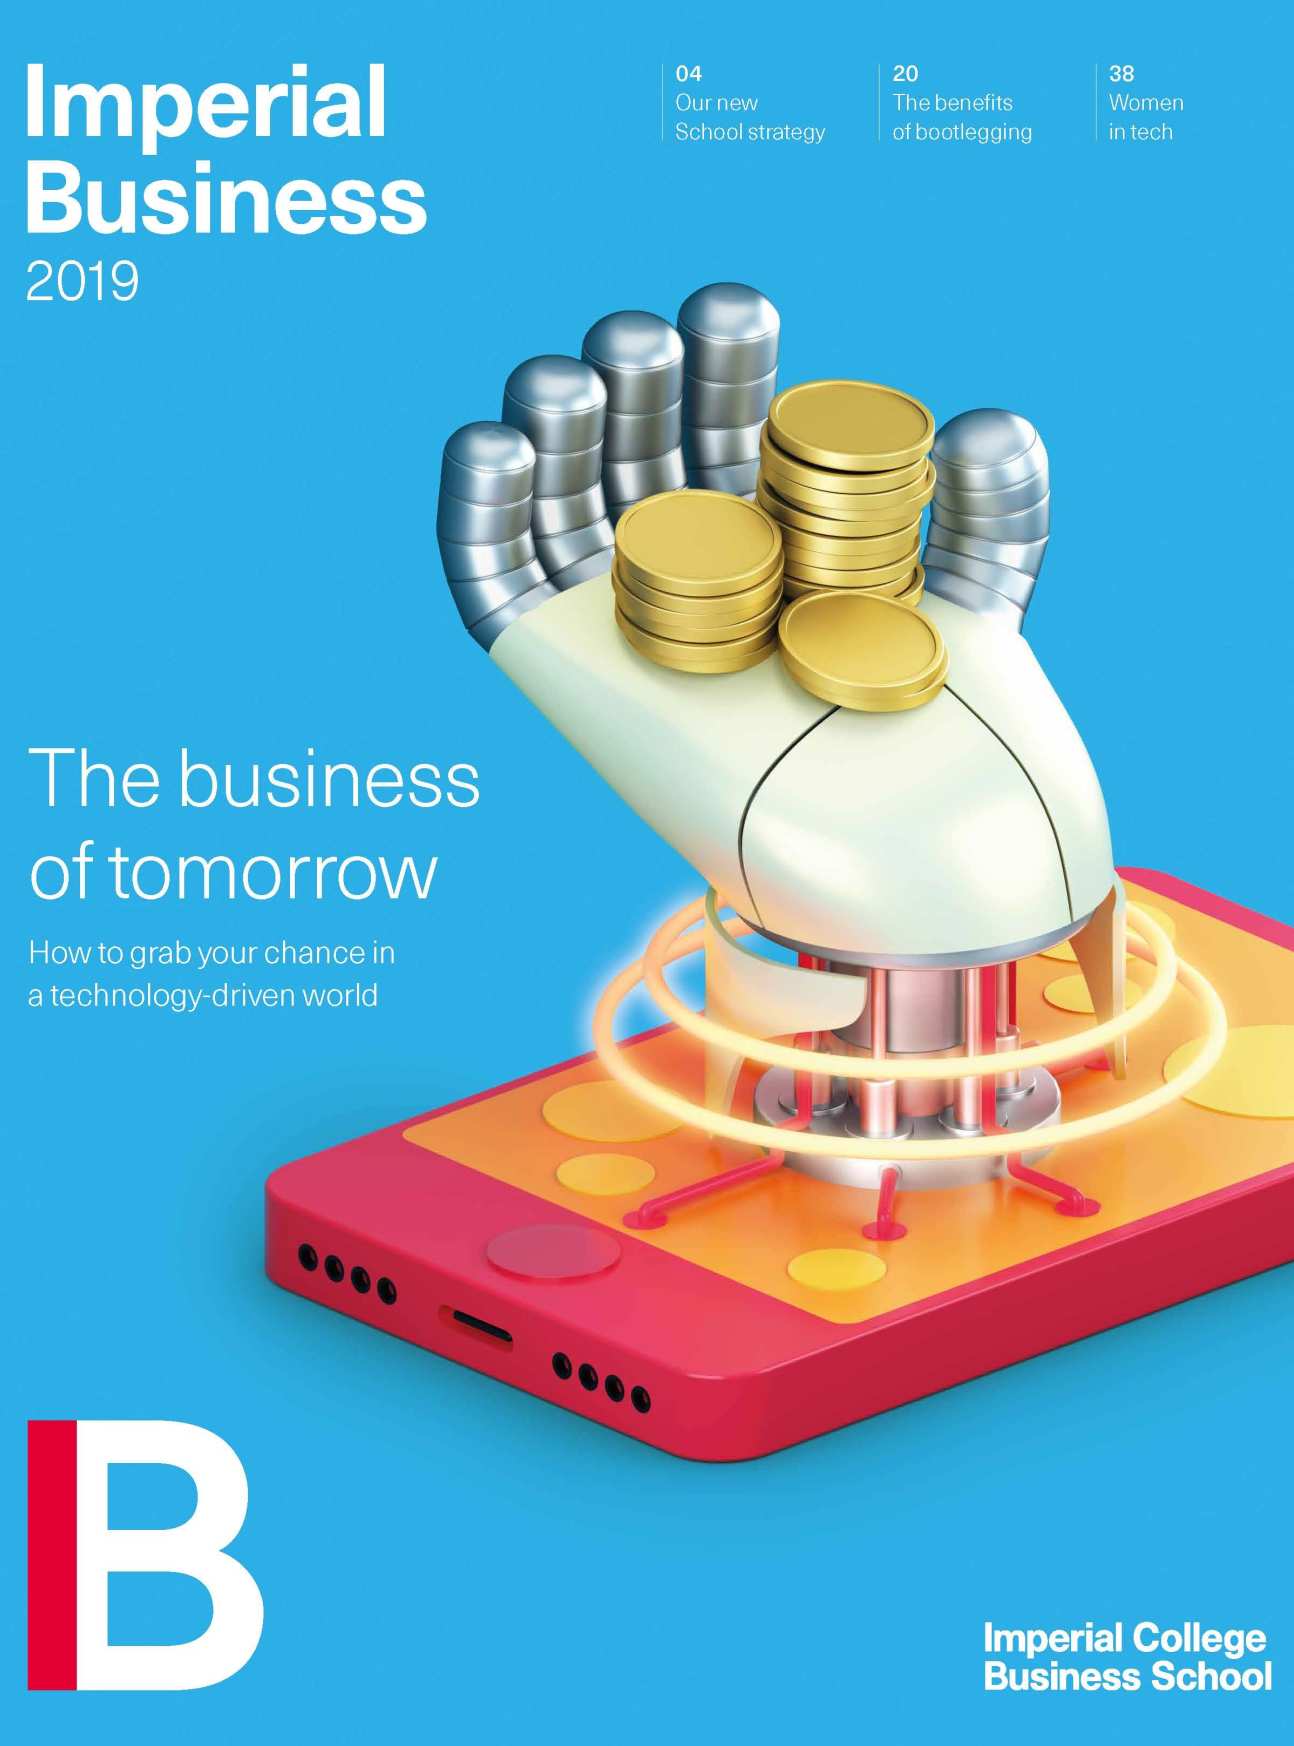 The Business School magazine front cover - a robotic hand holding coins